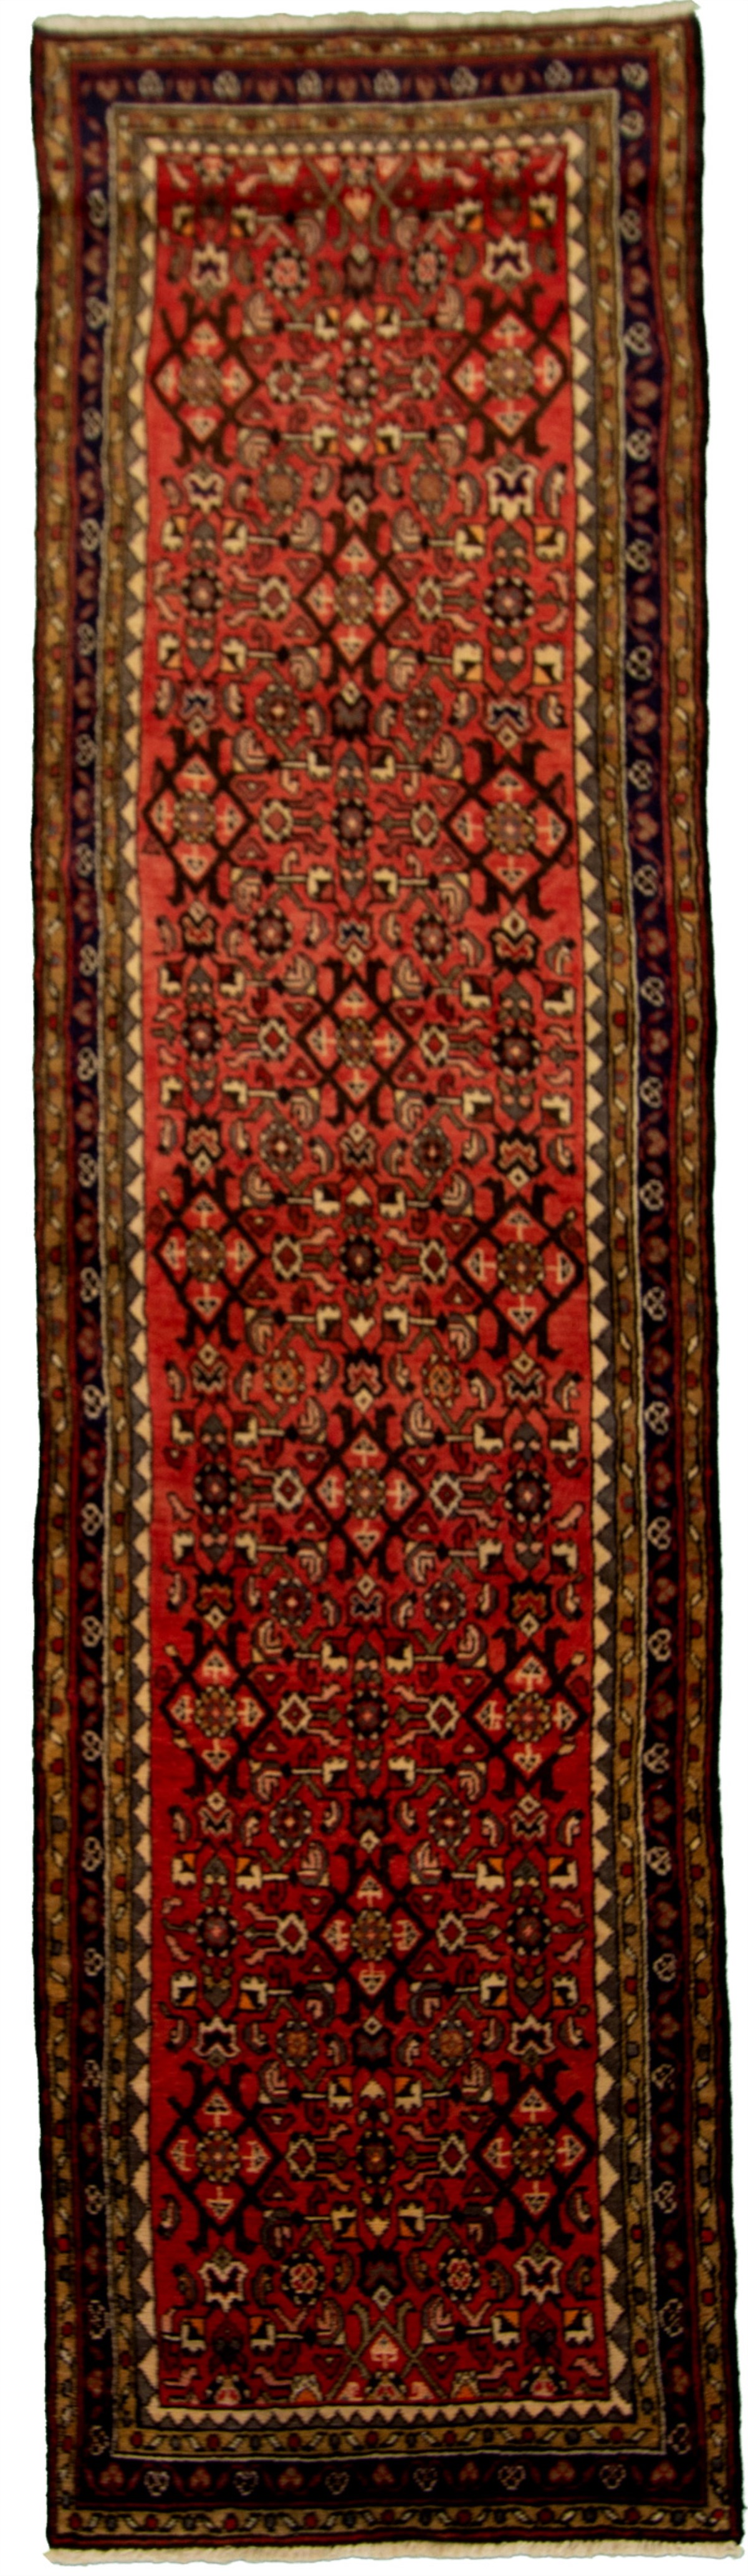 Hand-knotted Hamadan Red Wool Rug 2'9" x 10'0"  Size: 2'9" x 10'0"  